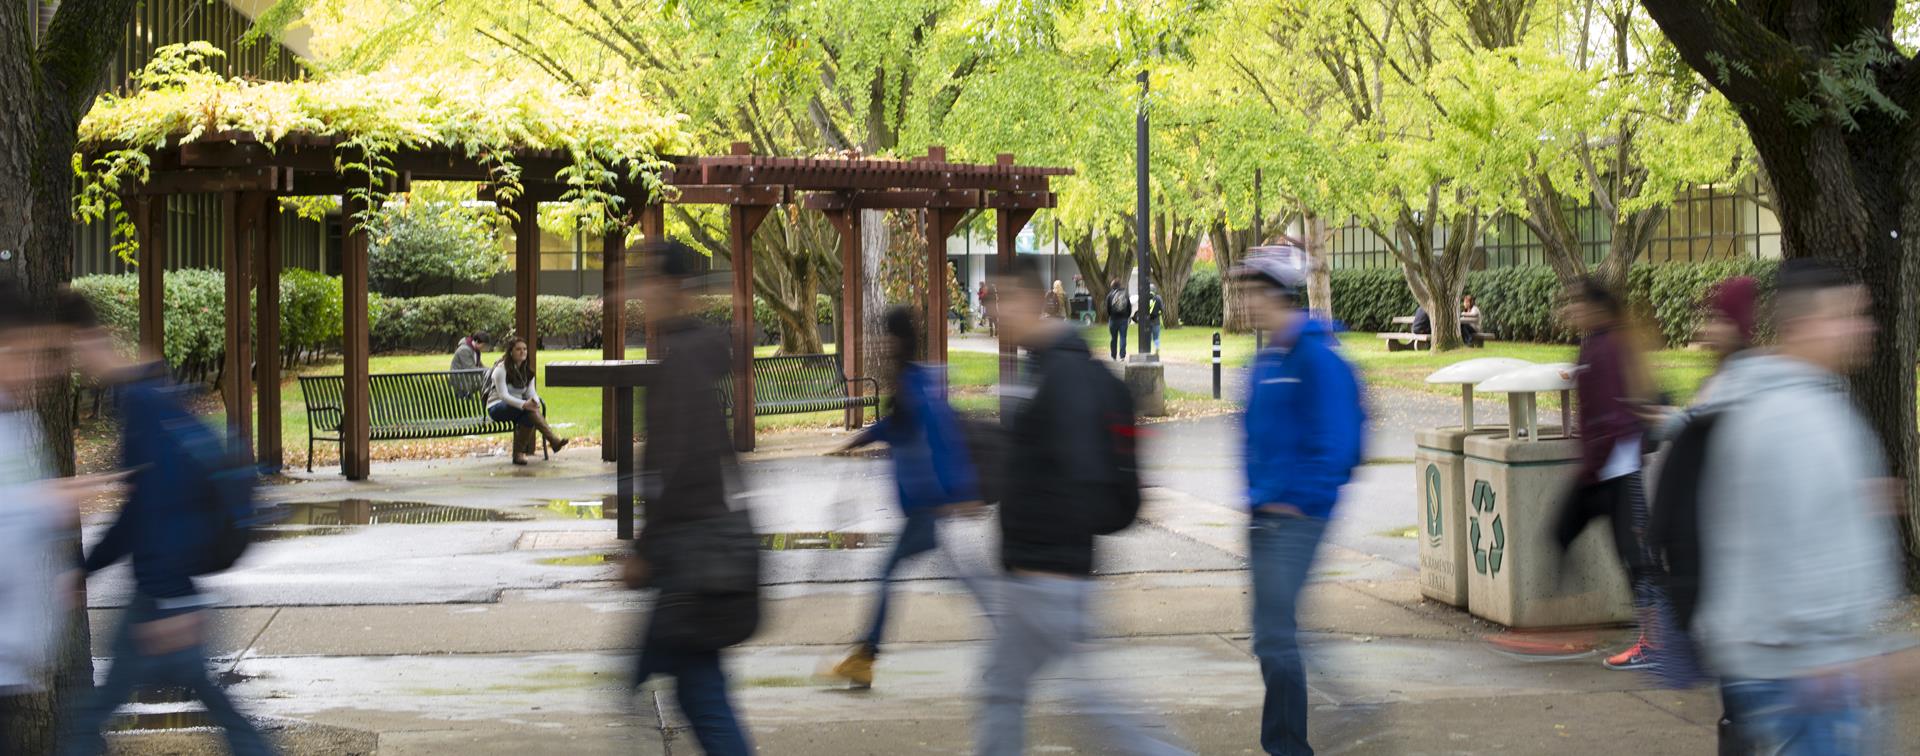 An image on people walking on a college campus where the background is clear and the people are blurry from walking.